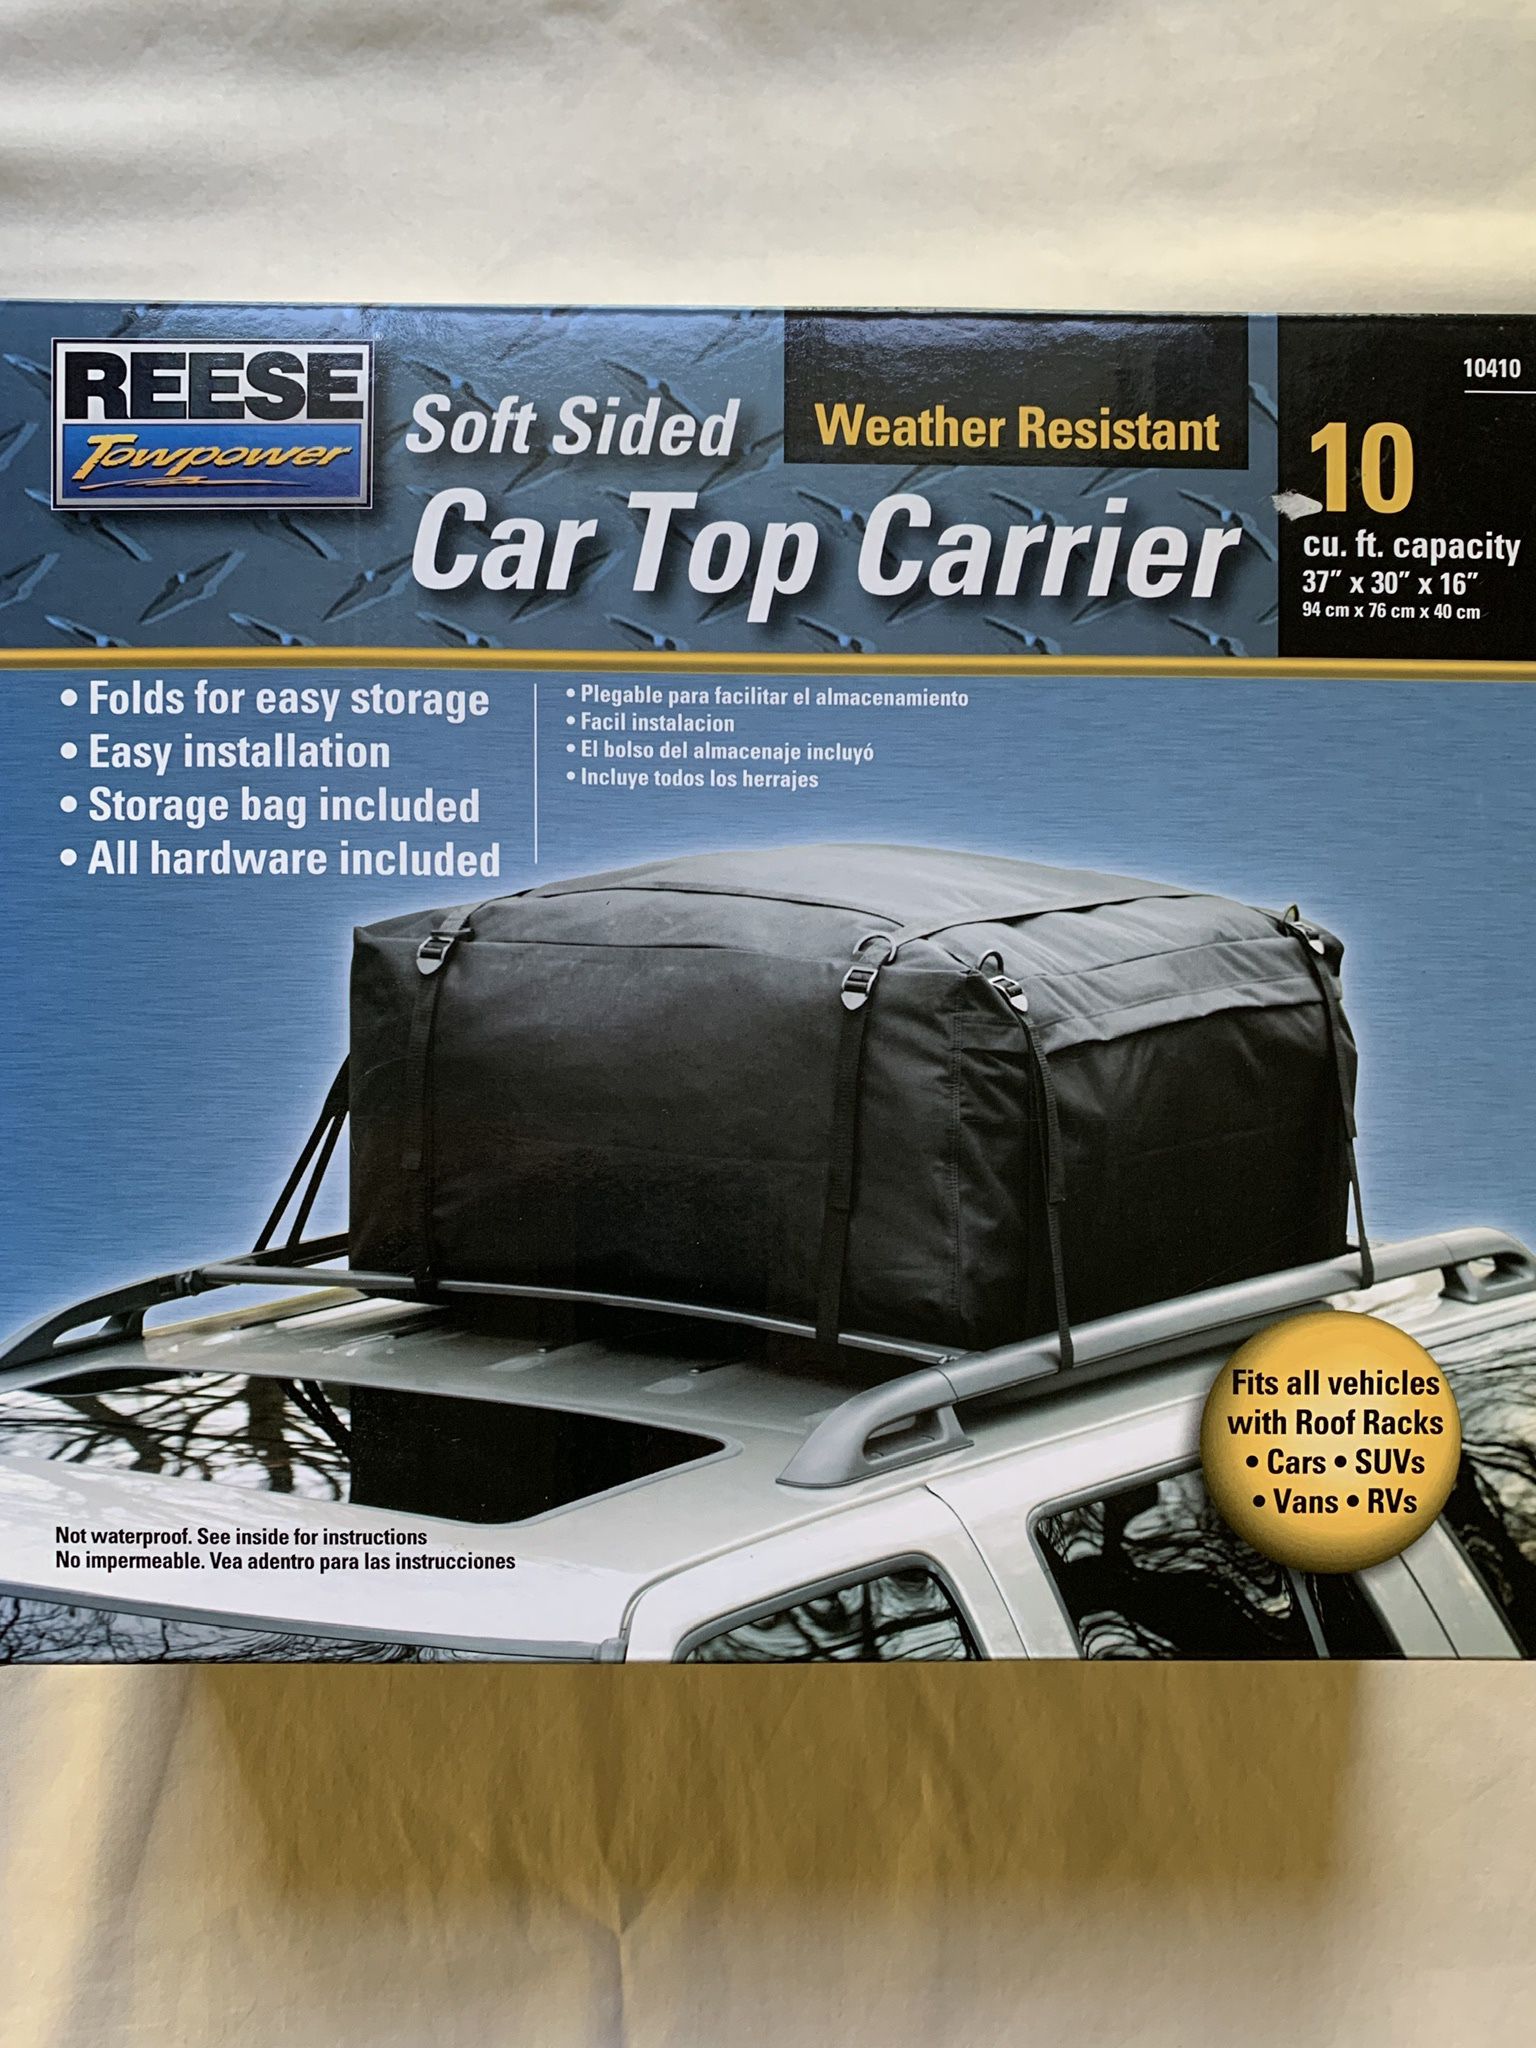 Reese Car Top Carrier  Brand New in Box  10 cu. ft  